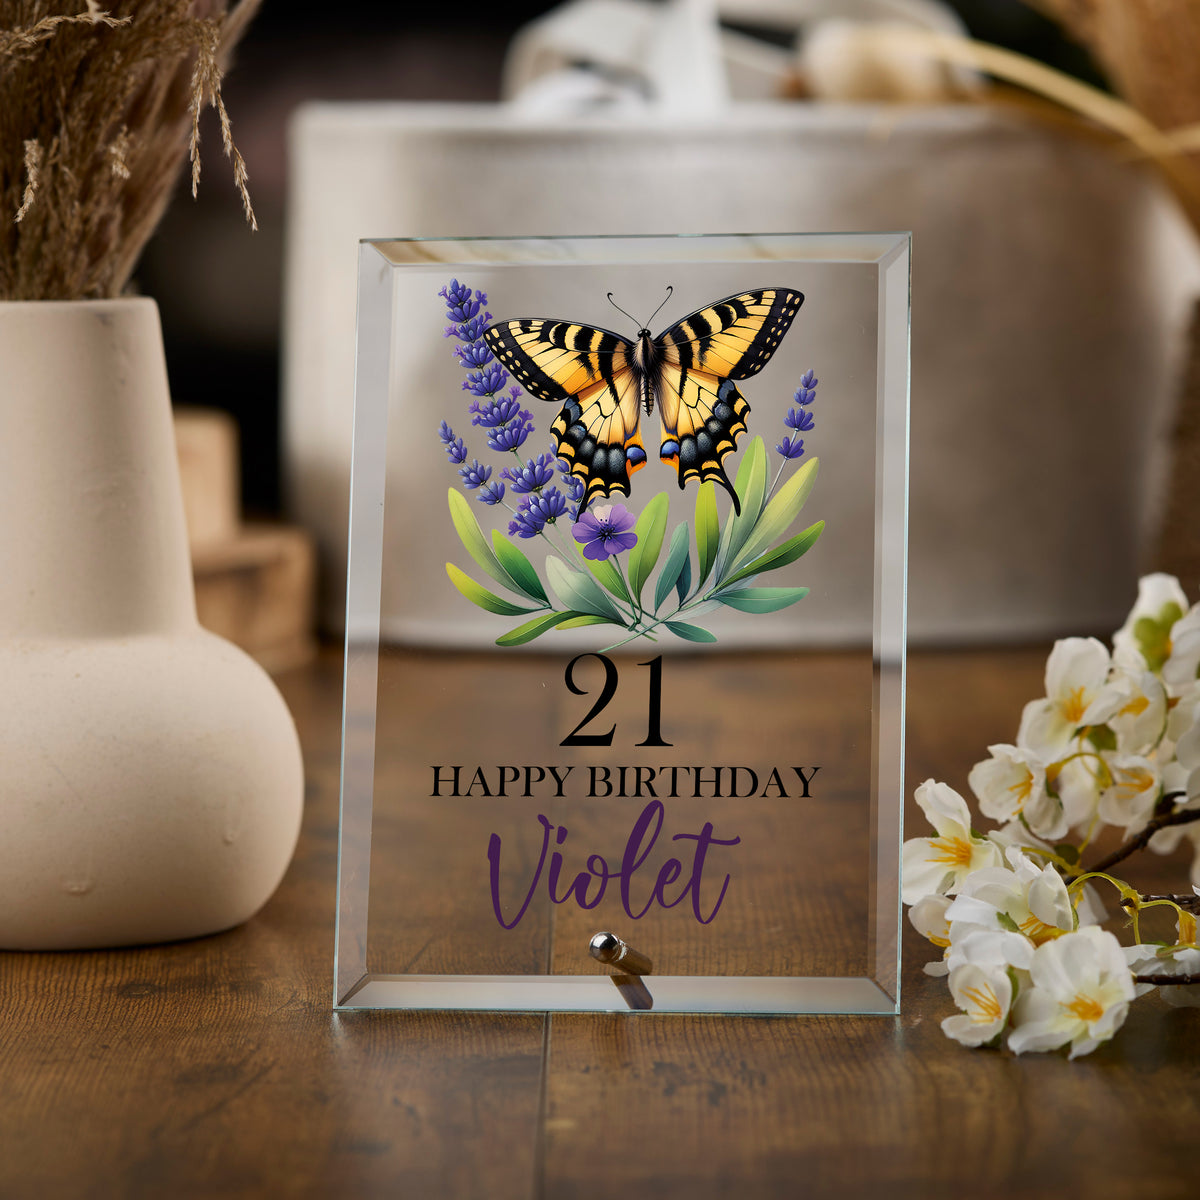 Personalised 21st Birthday Glass Plaque Gift With Butterflies